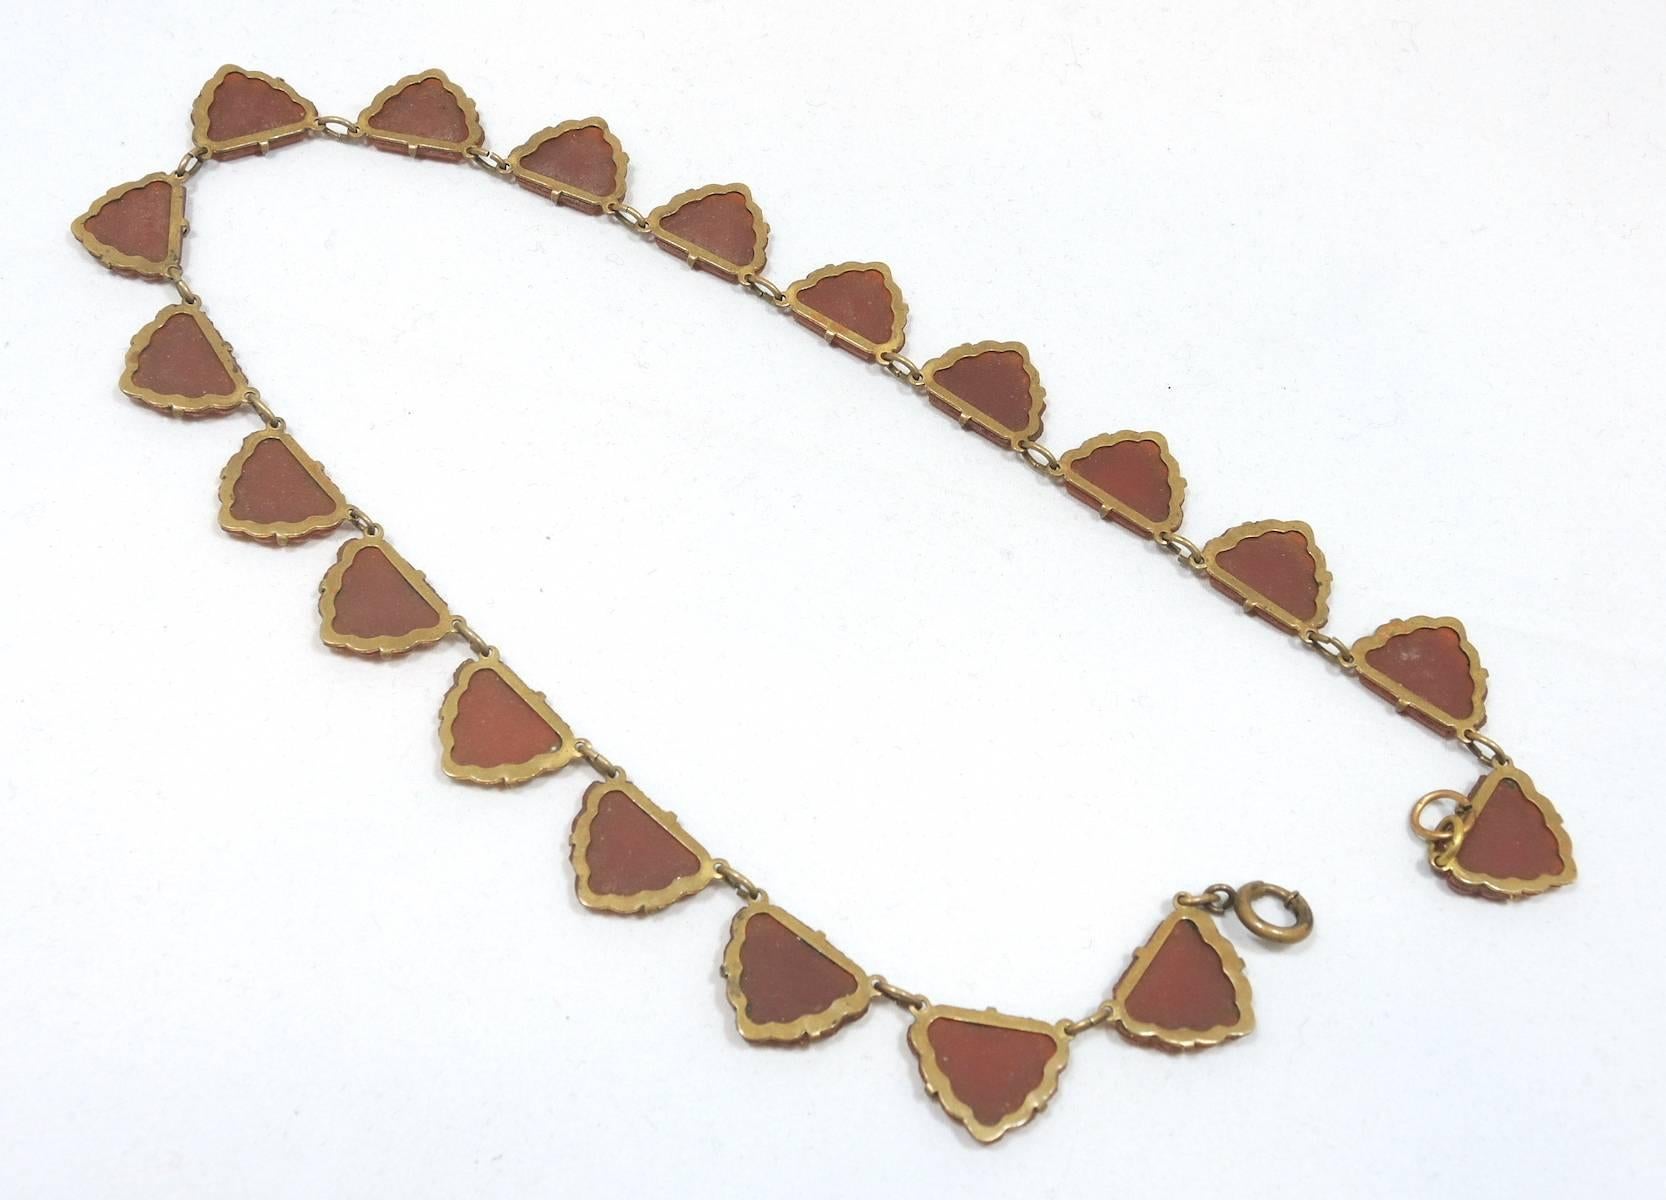 Vintage 1930s Czech Carnelian Seashell Necklace In Excellent Condition For Sale In New York, NY